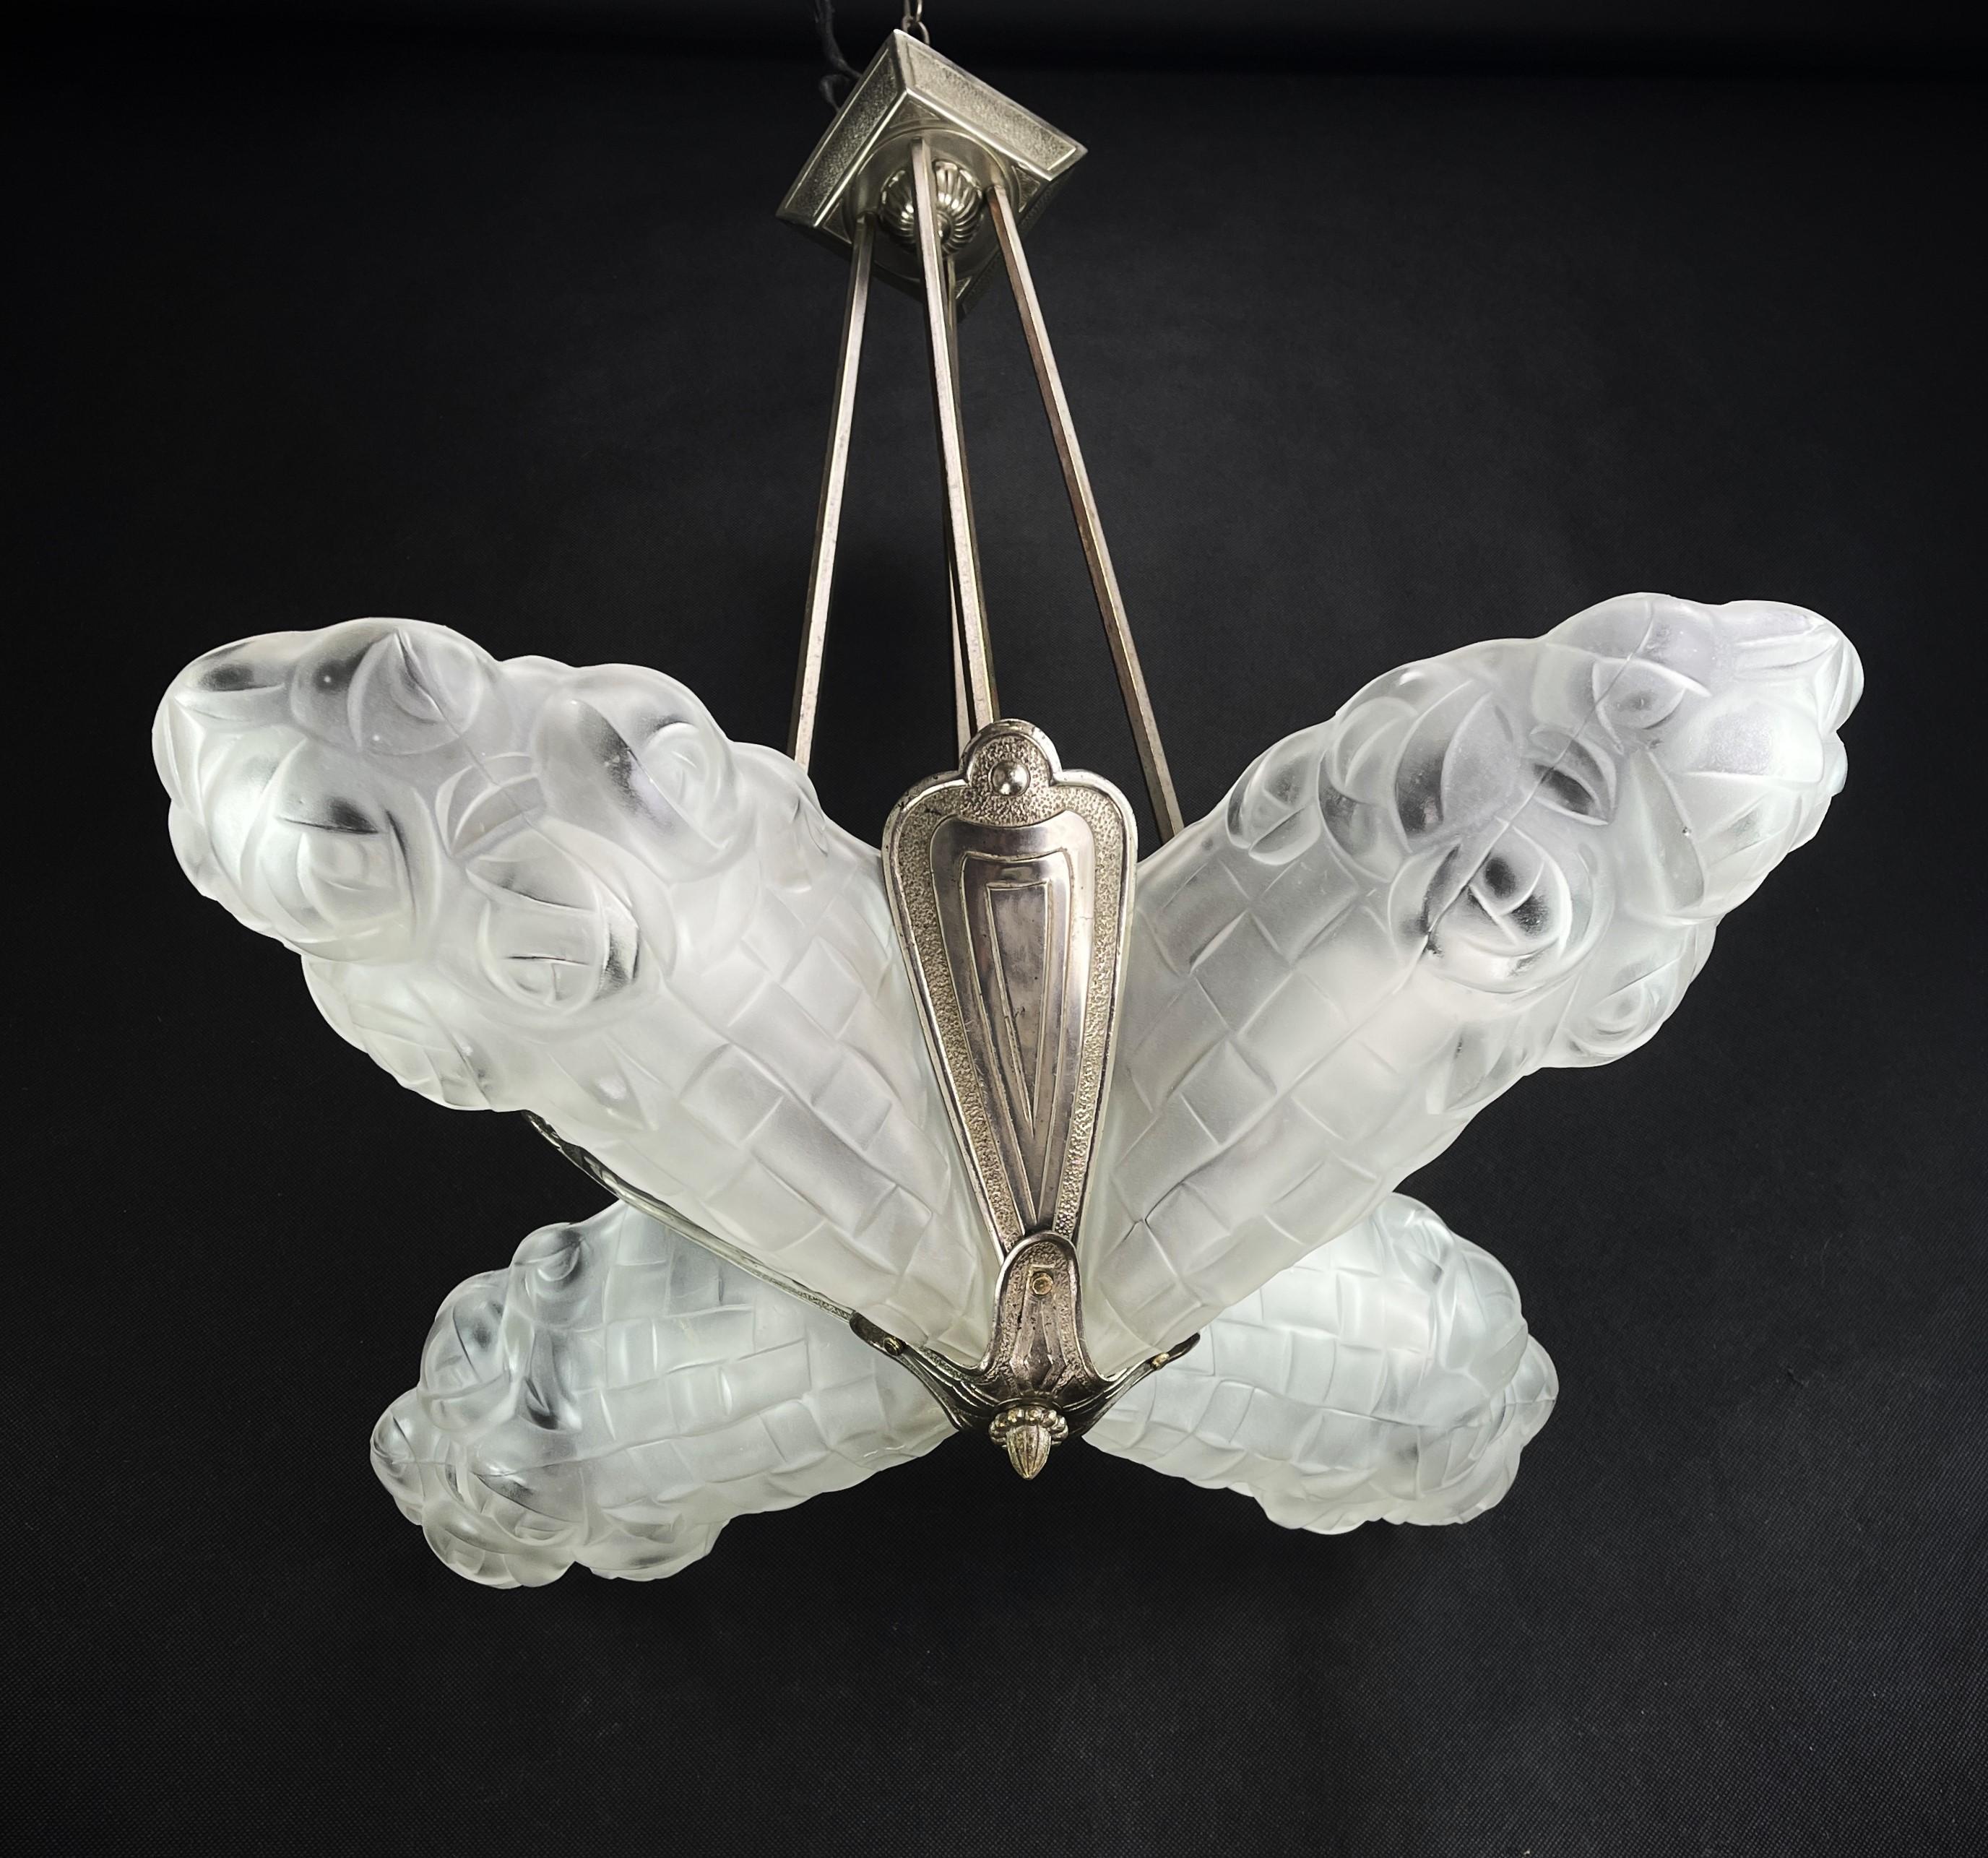 Art Deco Chandelier by Degue - 1920s.

This original pendant lamp captivates with its simple and matter-of-fact Art Deco design. The lamp has a signature on its satin frosted glass shade and gives a very pleasant light. This ceiling lamp is an